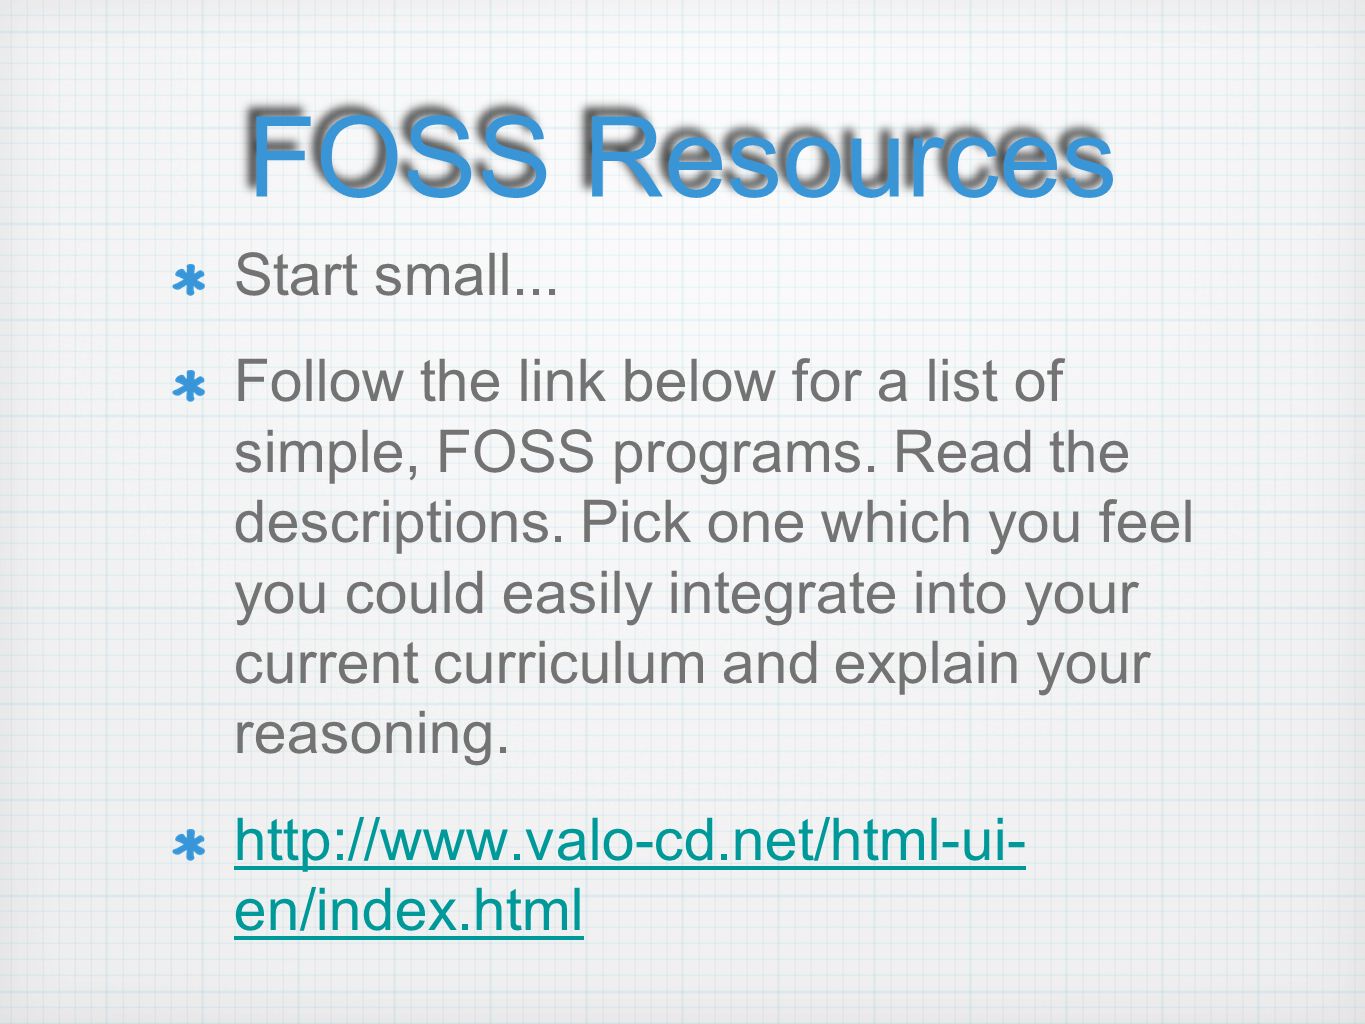 Start small... Follow the link below for a list of simple, FOSS programs.